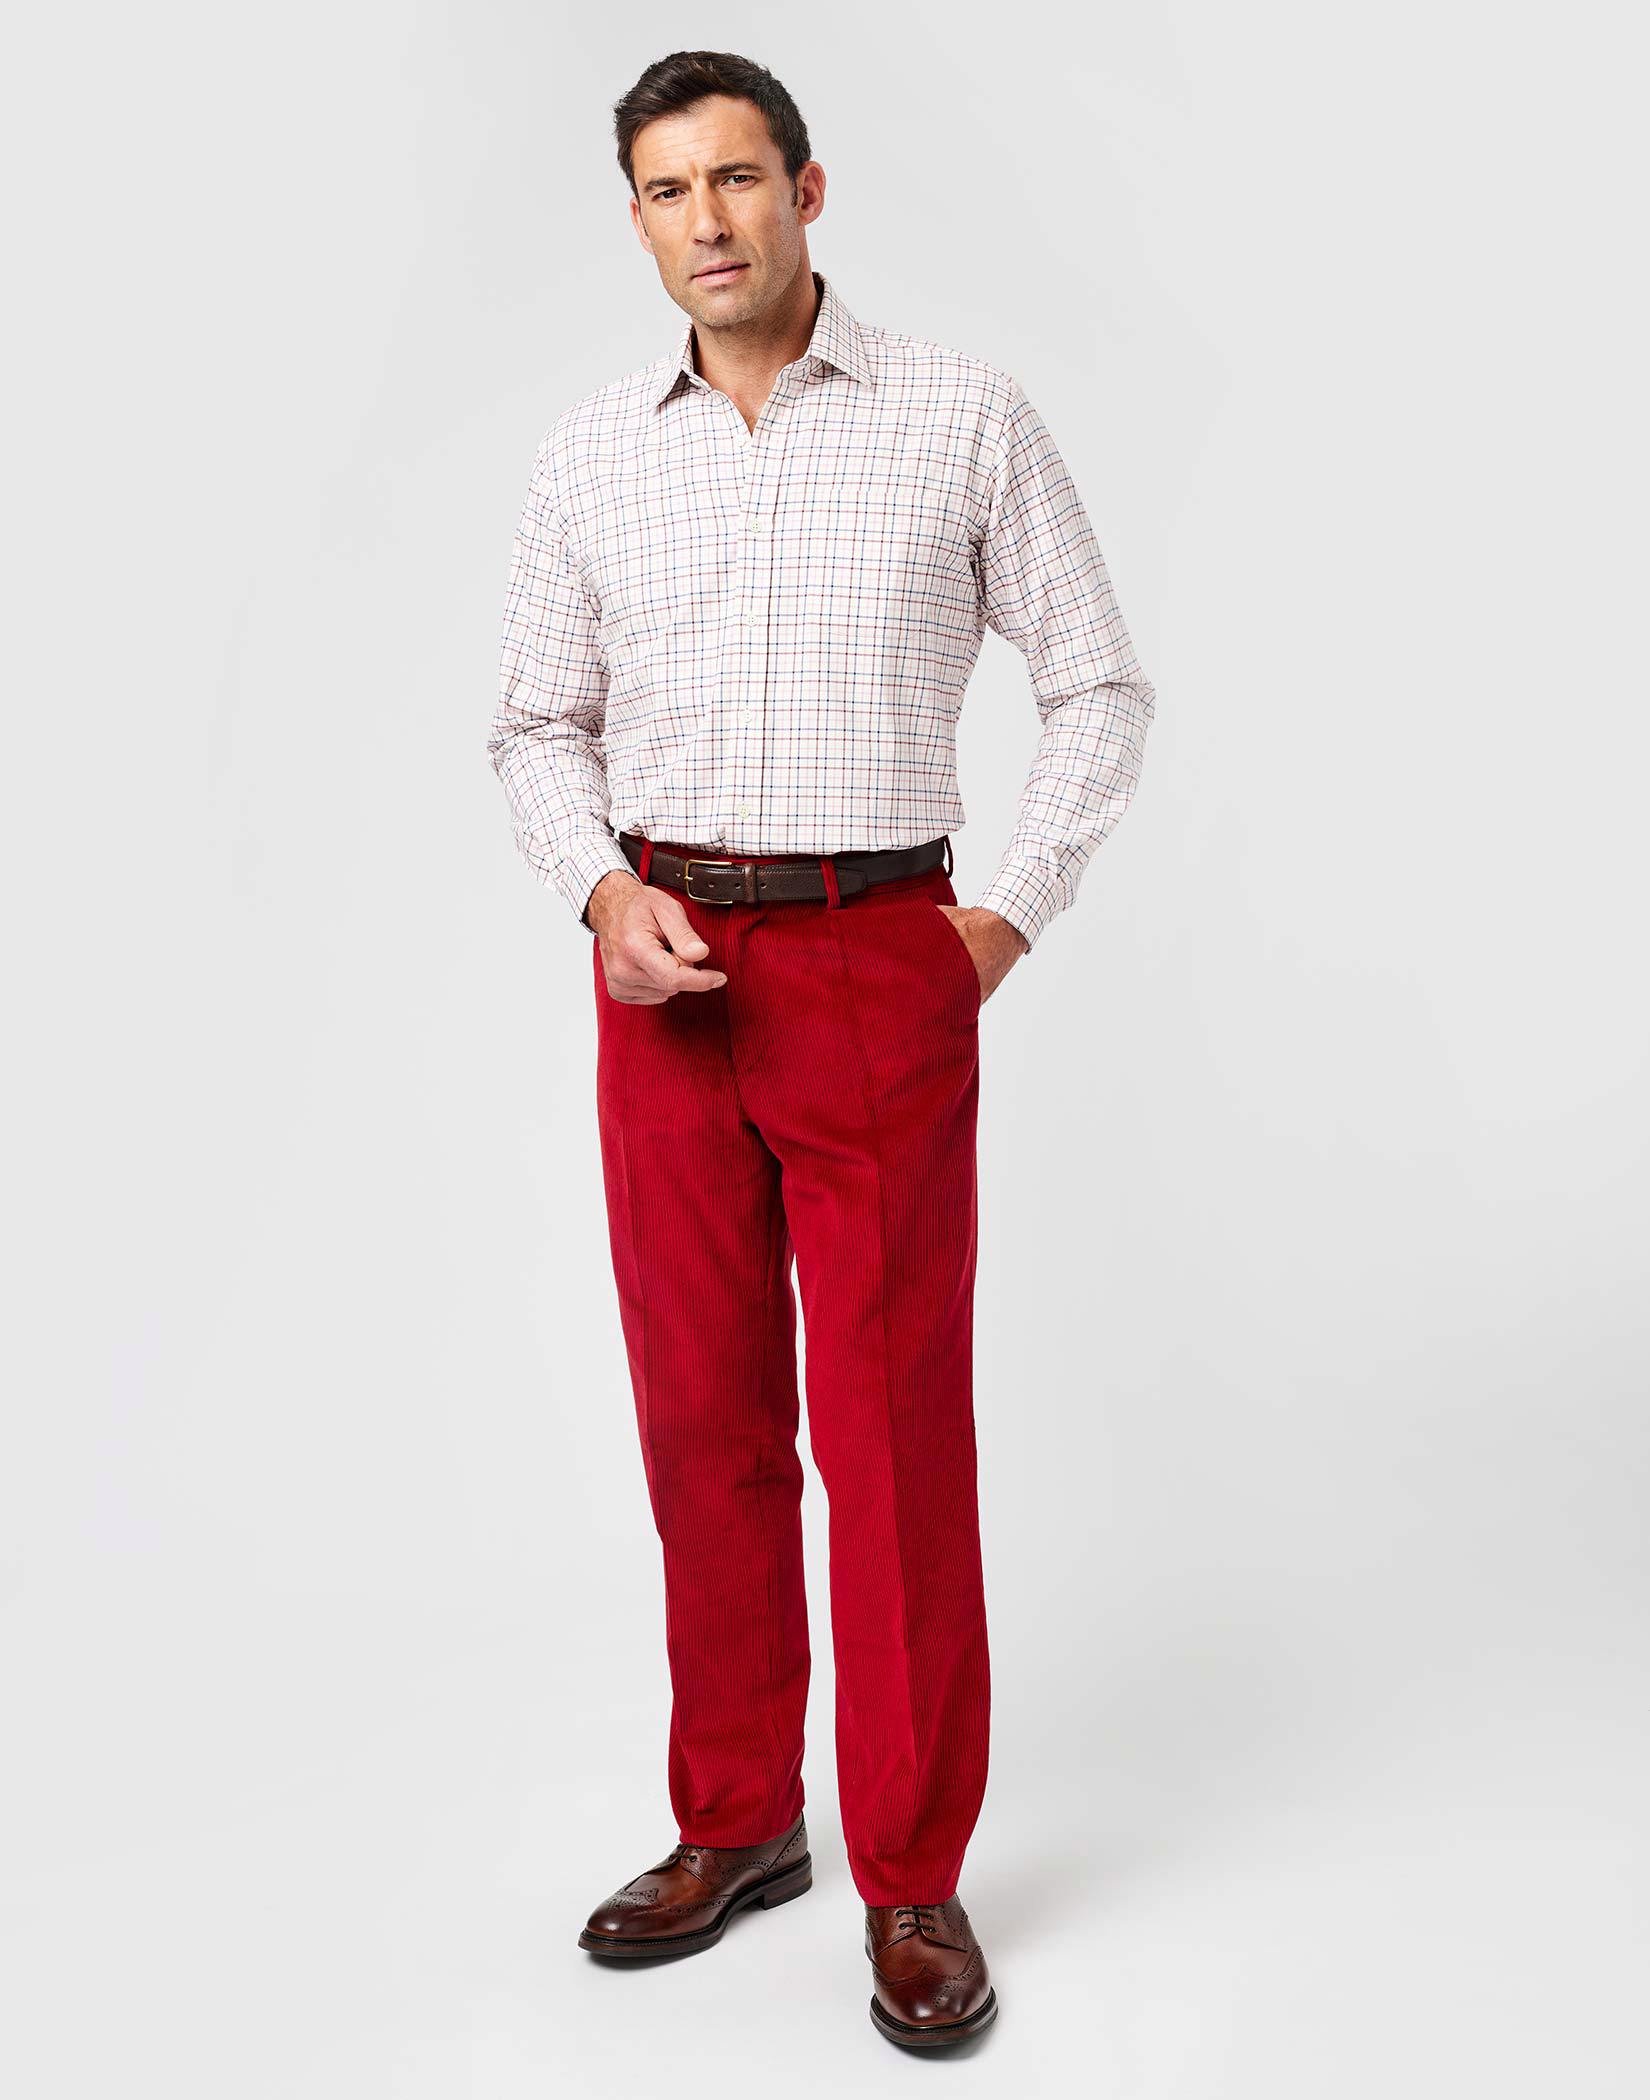 Red corduroy trousers with baseball jersey tshirt  sandals